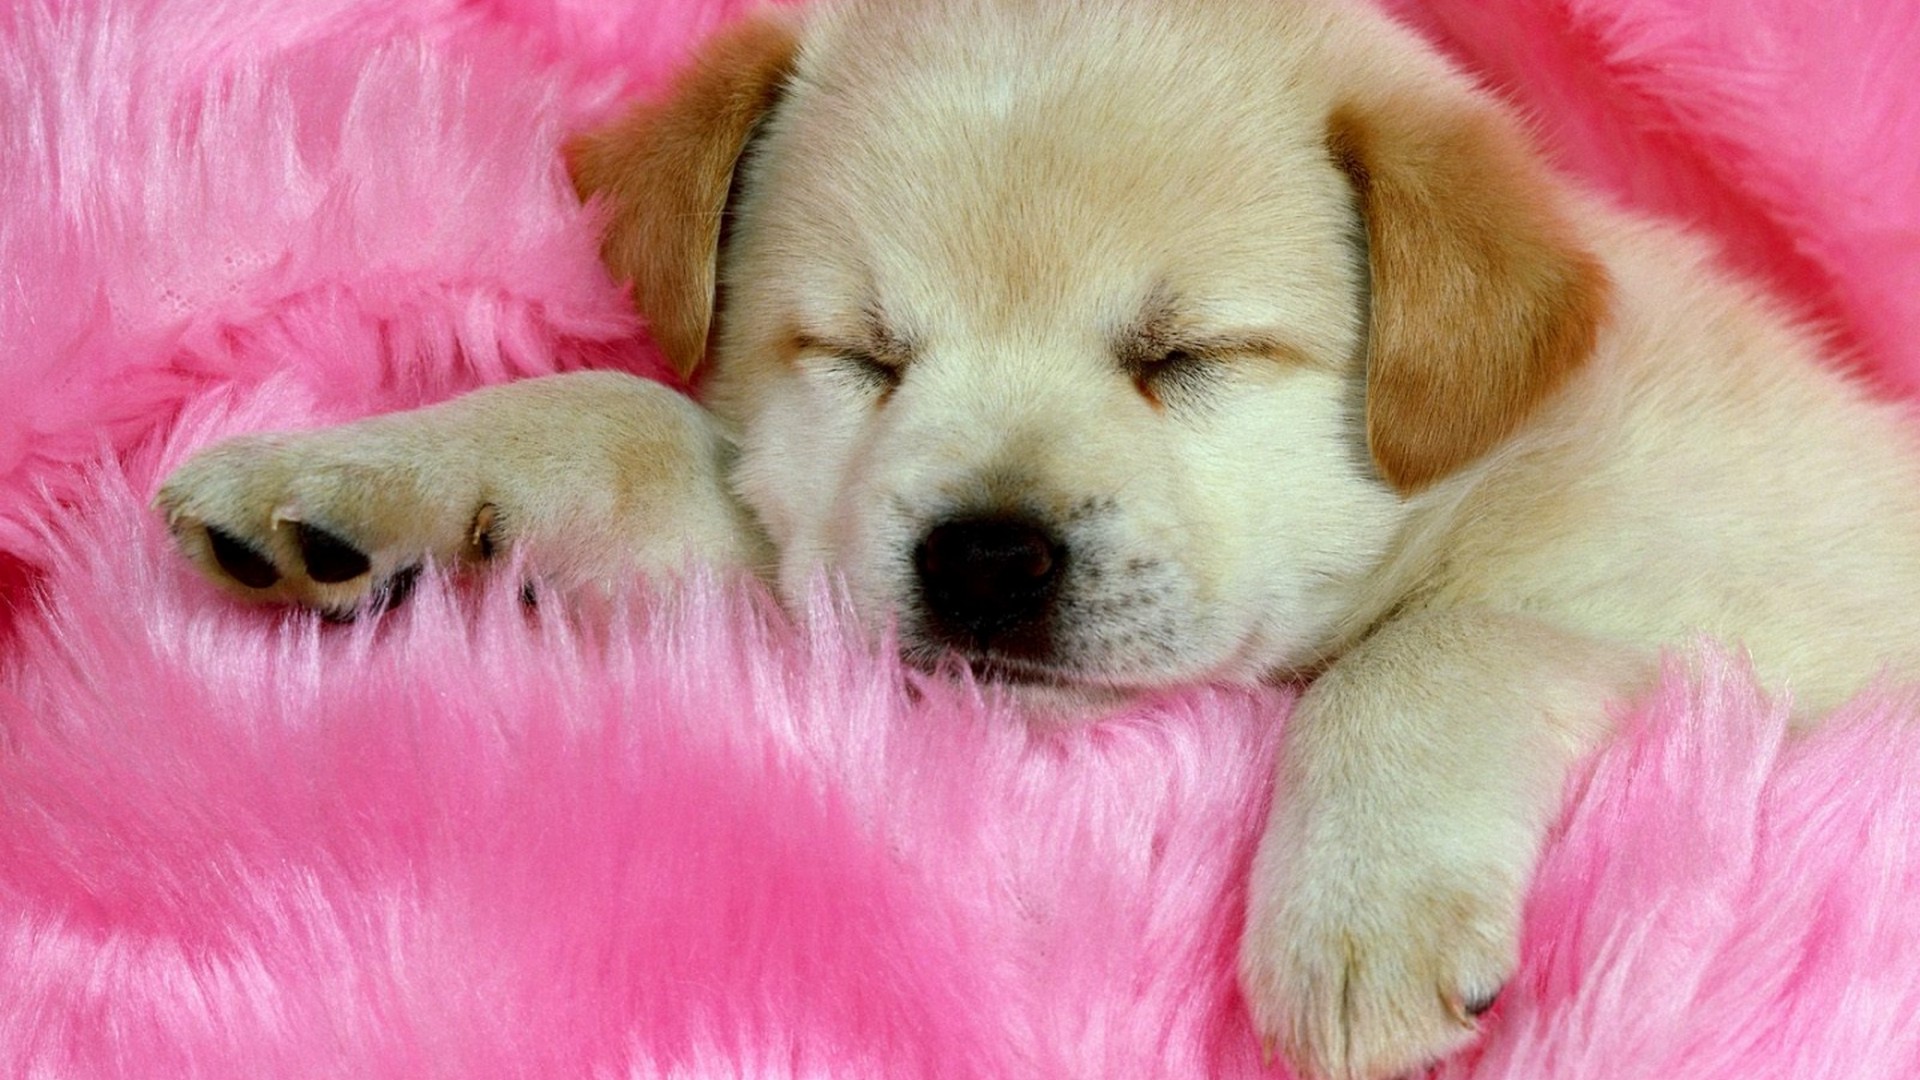 Puppy HD Wallpaper With Resolution 1920X1080